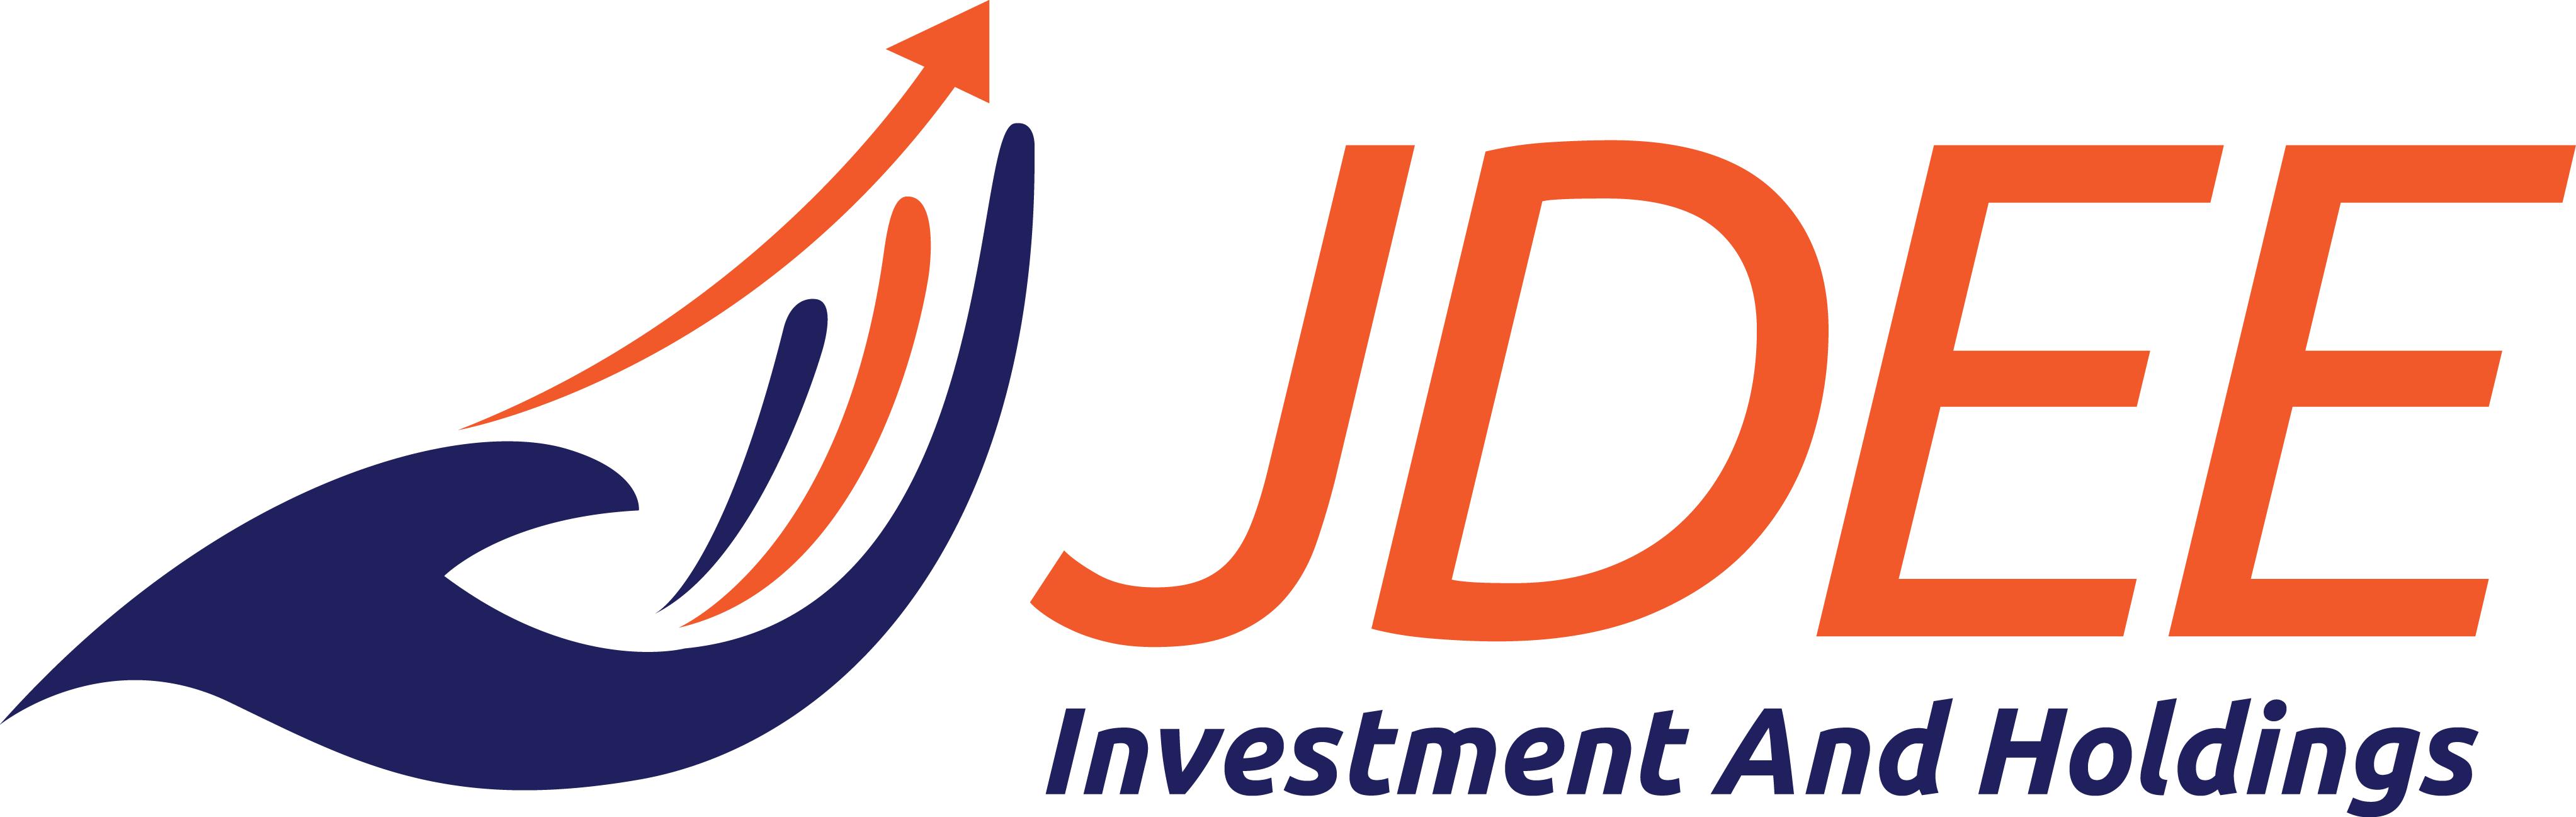 JDEE INVESTMENT AND HOLDINGS